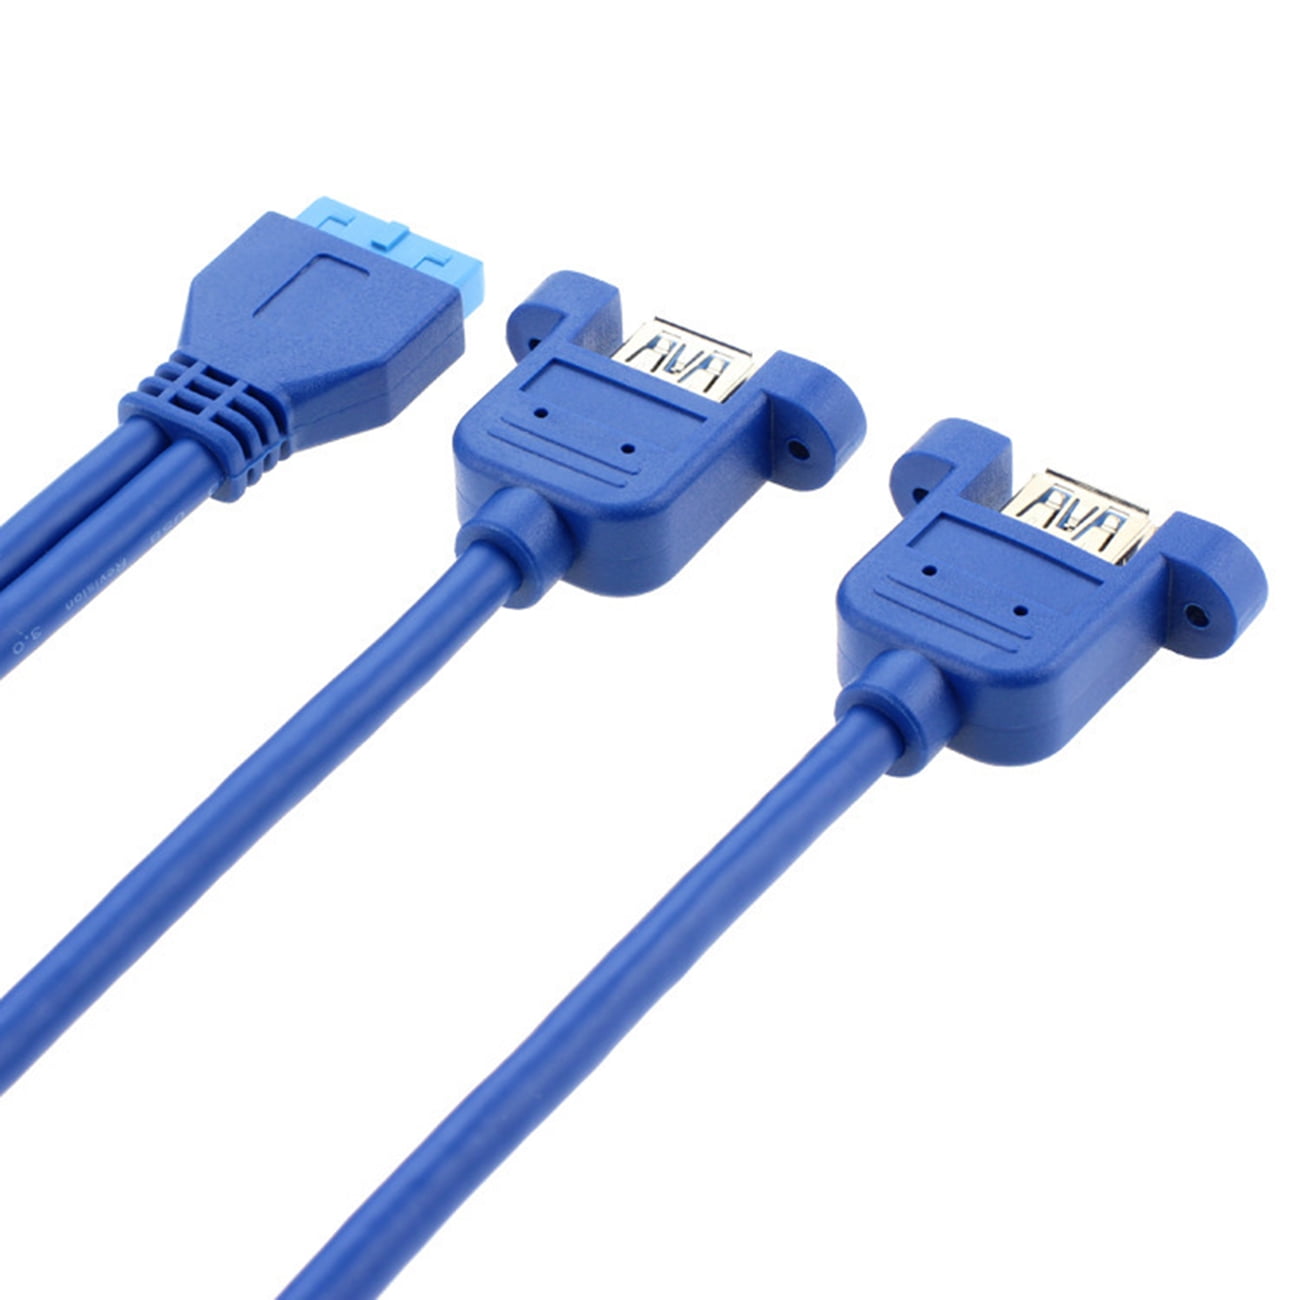 Cable Length: 5M, Color: Black Computer Cables Micro B USB 3.0 Micro B Cable Wire with Panel Mount Screw Lock Connector Cord Prevent Come Off 5 Meters